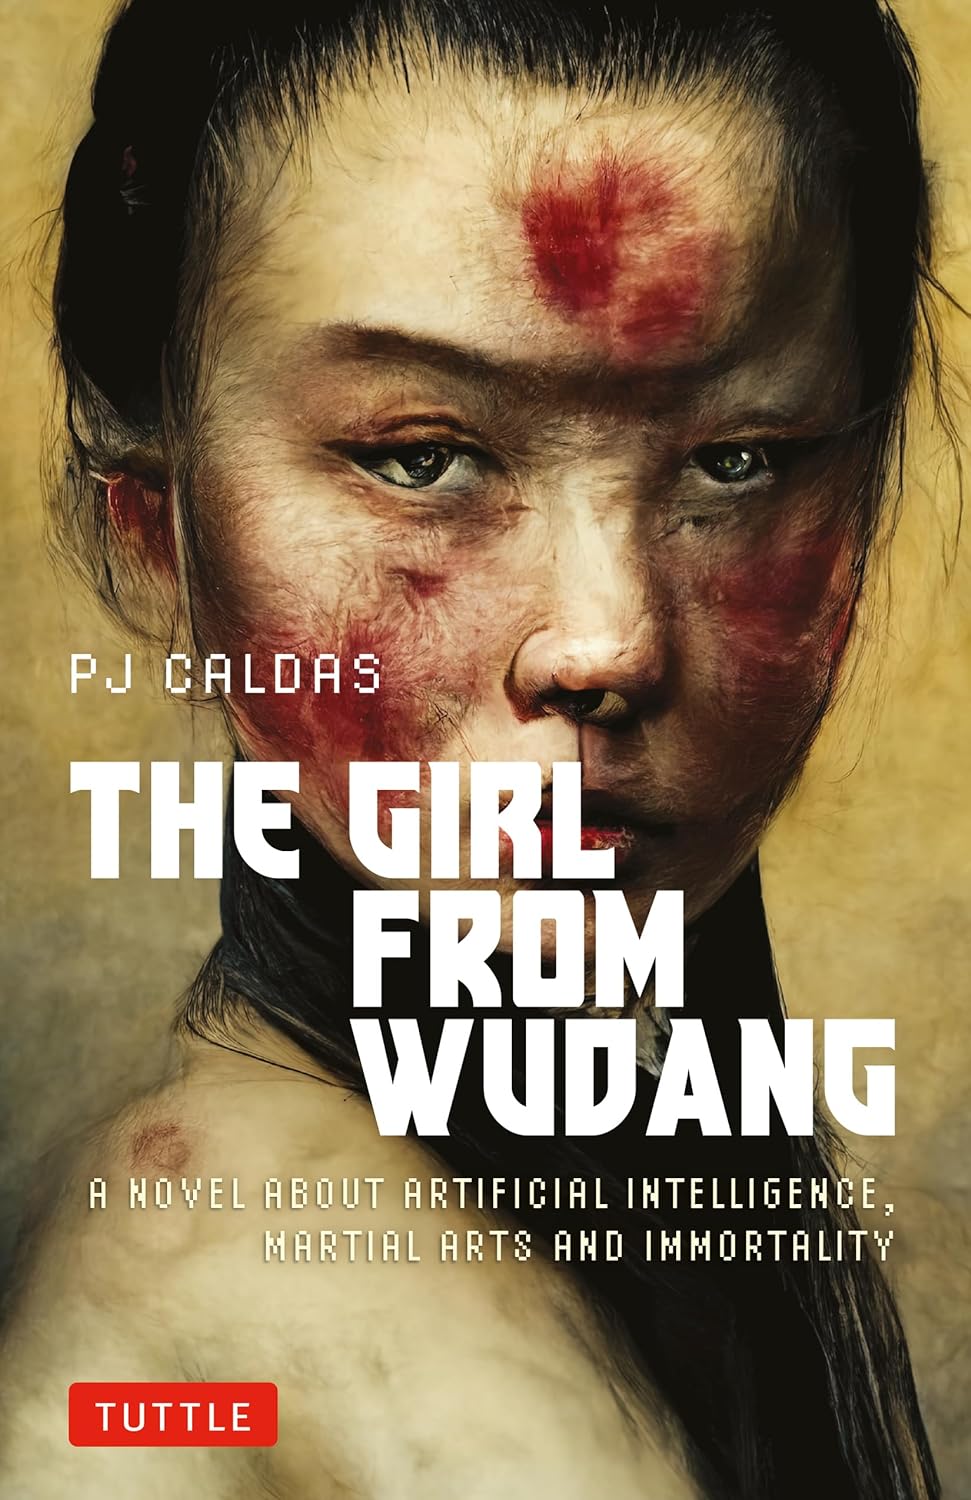 The Girl From Wudang by PJ Caldas